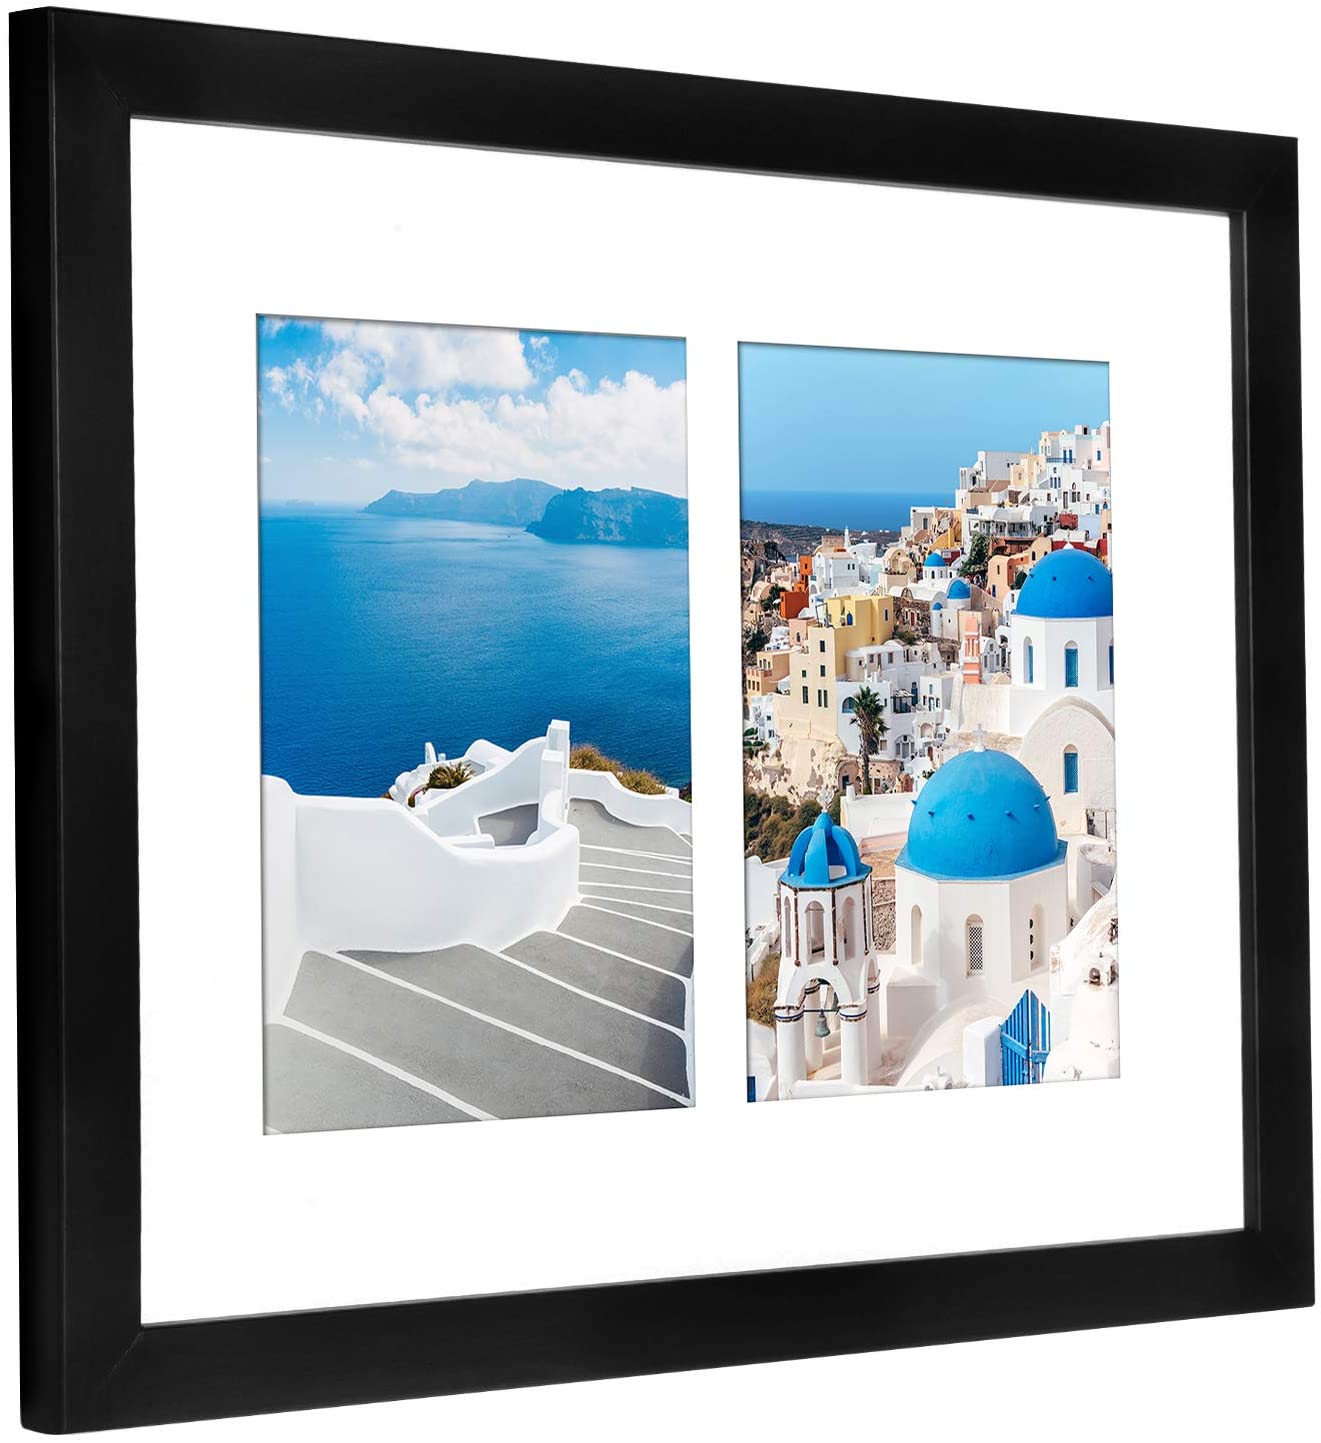 11x14 Black Collage Picture Frame | Displays Two 5x7 inch Photos with Mat or One 11x14 inch Photo Without Mat. Lead Free Glass. Hanging Hardware Included! - Picture Frame - Americanflat